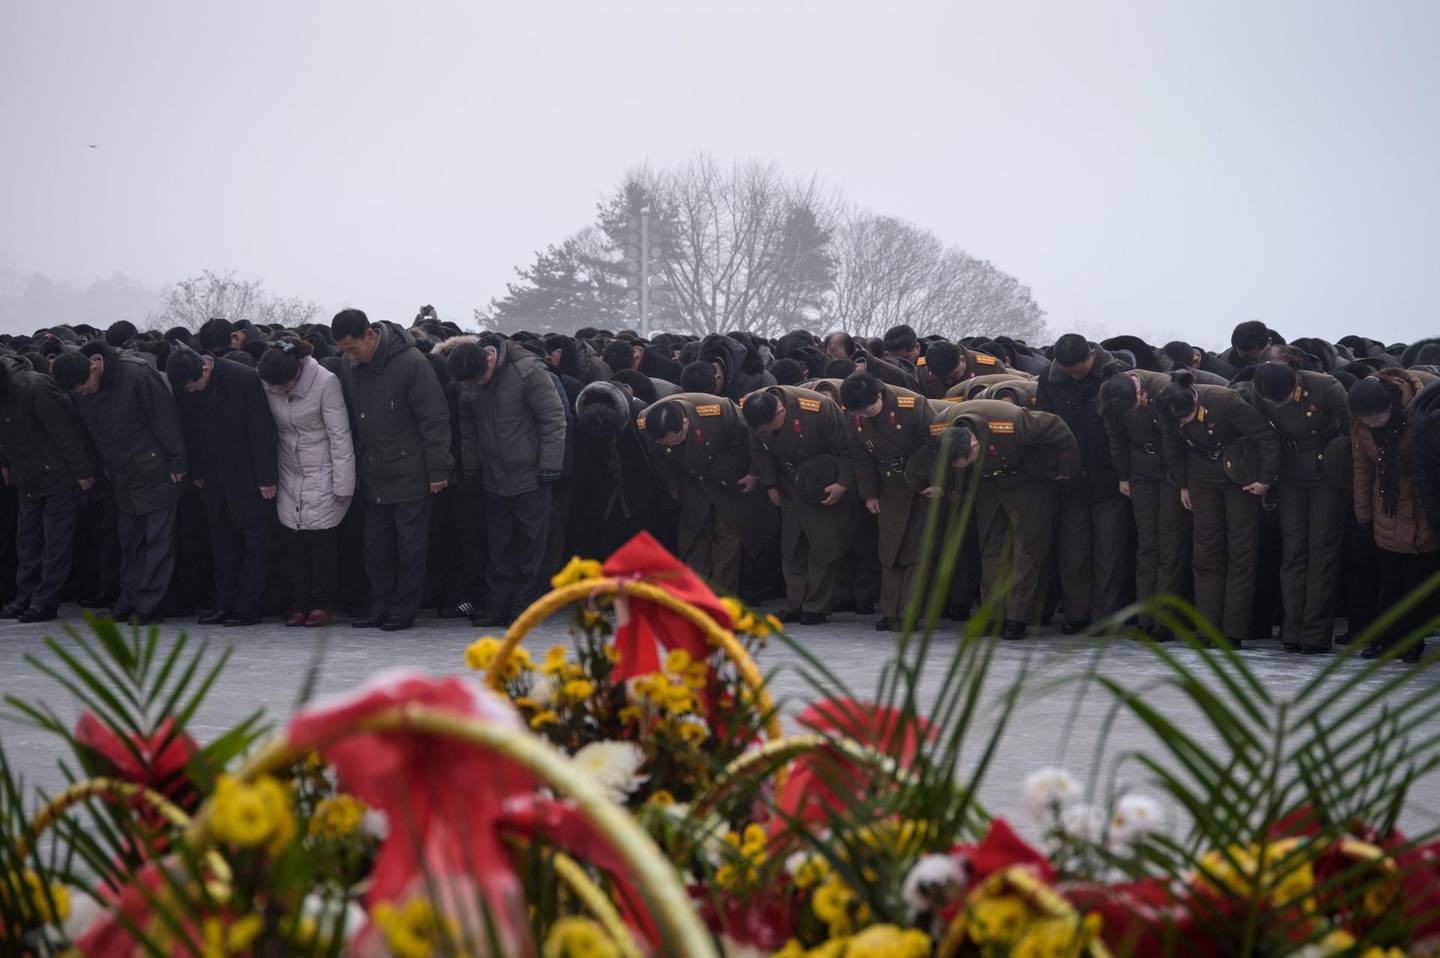 Pyongyang residents bow before the statues of late North Korean leaders Kim Il Sung and Kim Jong Il during National Memorial Day on Mansu Hill in Pyongyang on December 17, 2018. North Korea is marking the seventh anniversary of the death of Kim Jong Il. / AFP / KIM Won Jin
